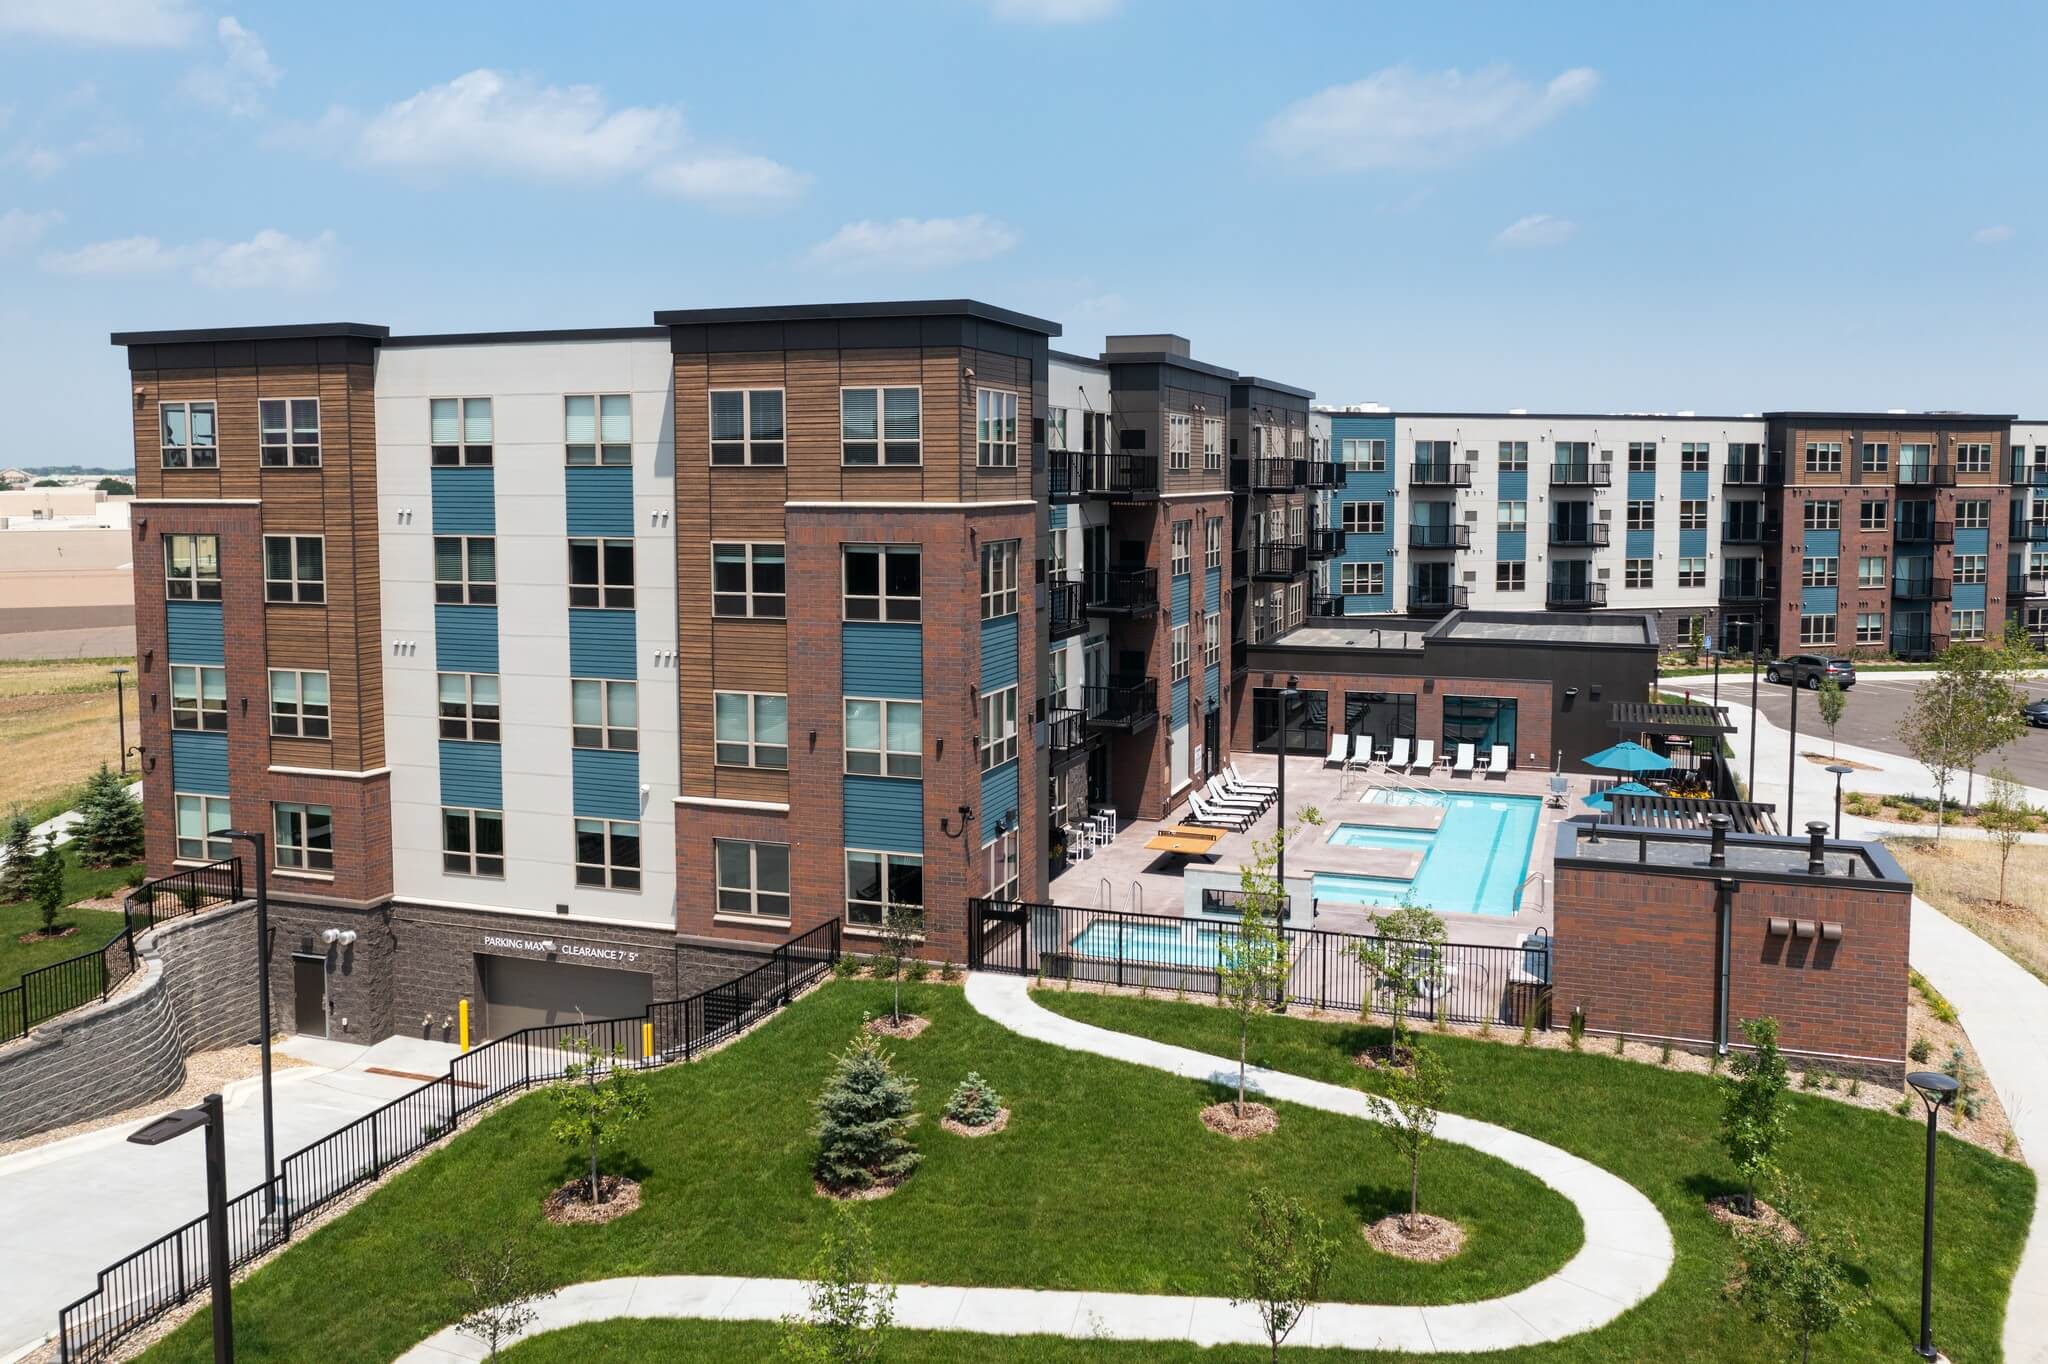 Aster apartments exterior showing building, green space, walking path, and pool